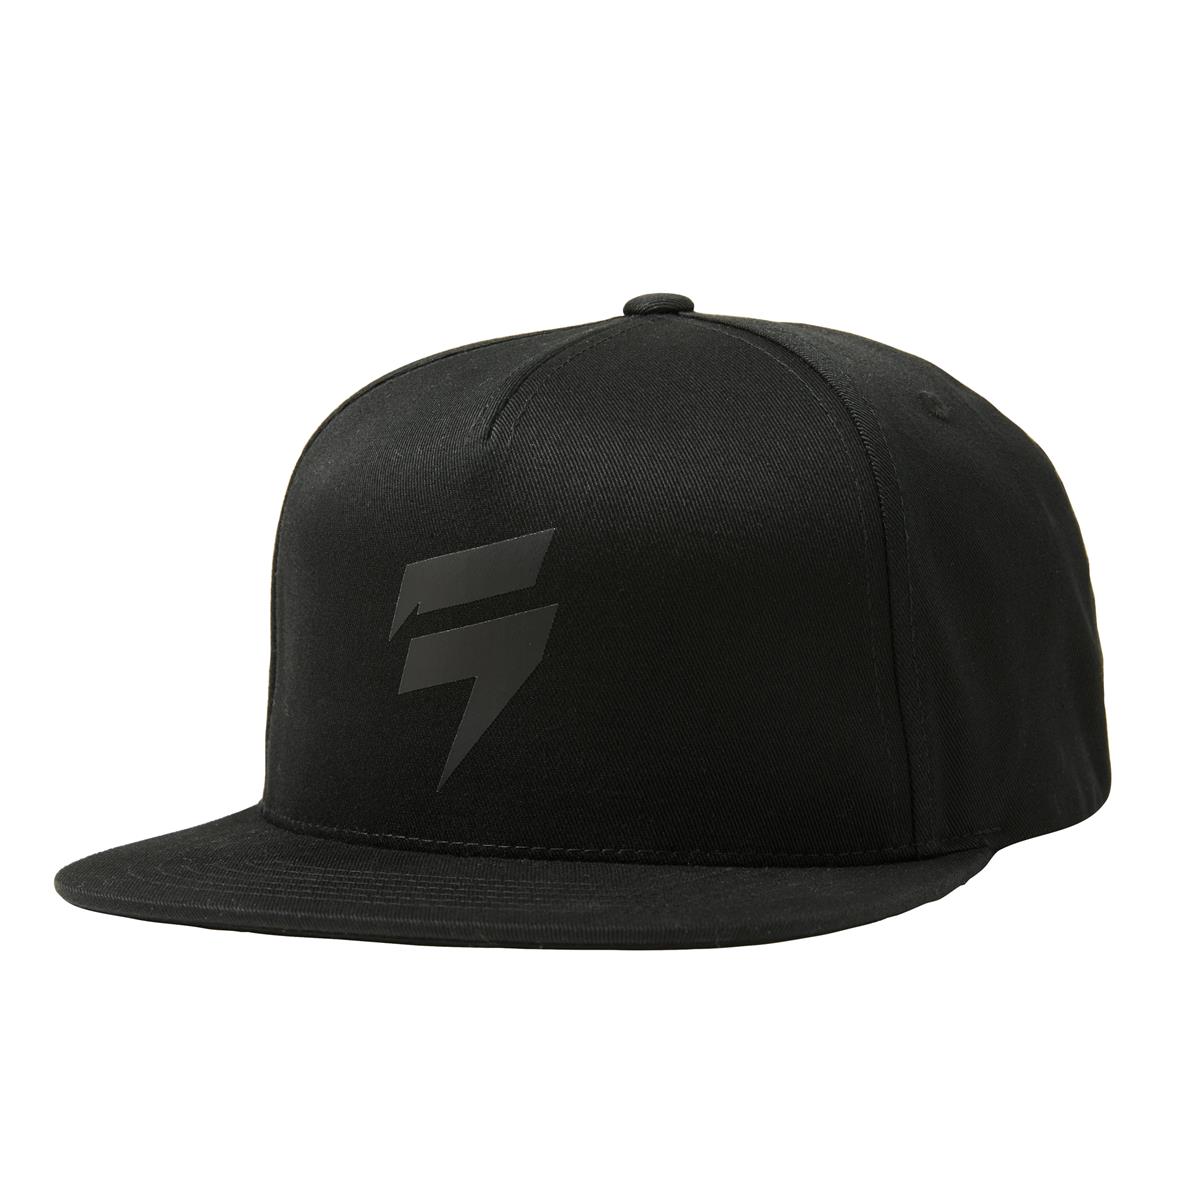 Shift Snapback Cap Bolted Black/Silver